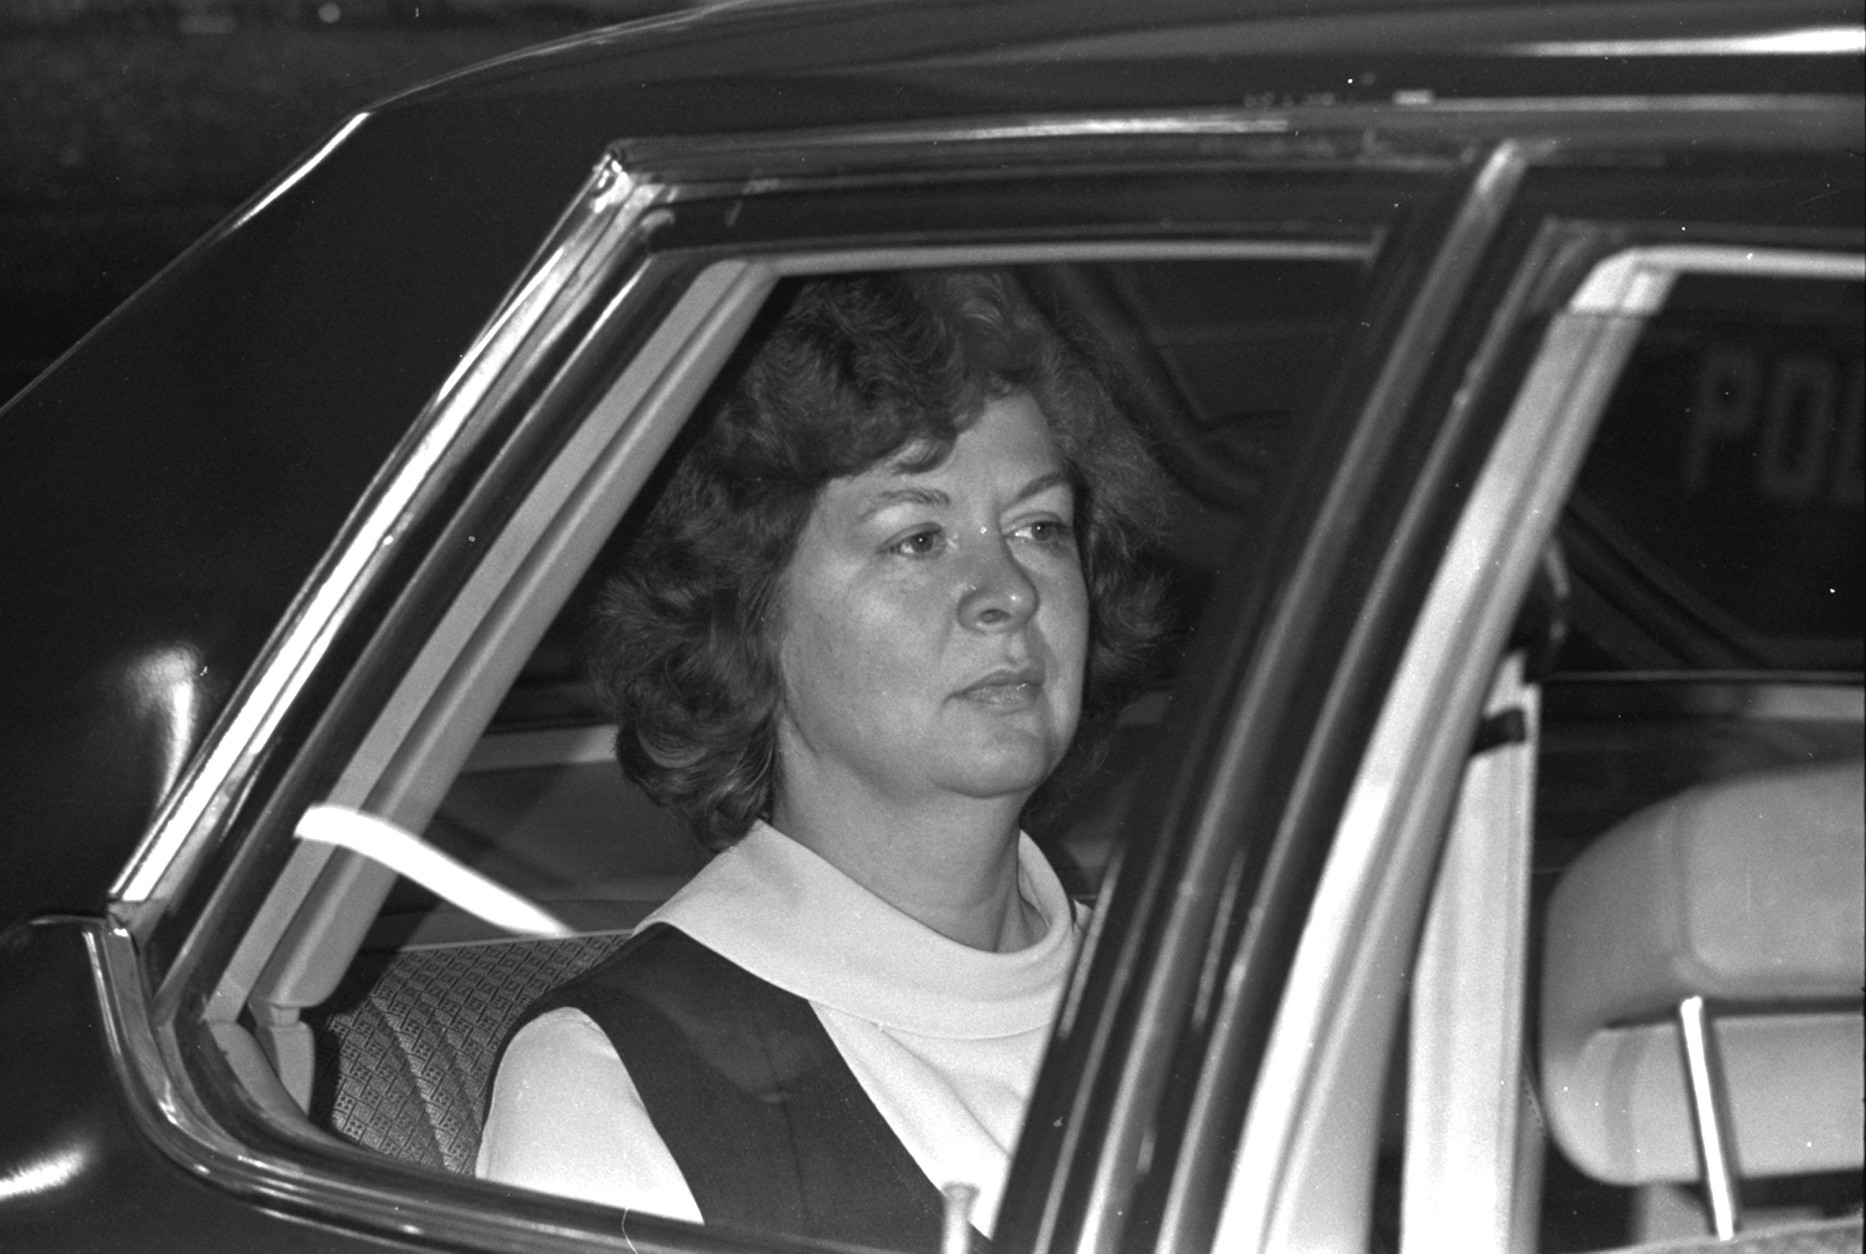 On Sept. 22, 1975, Sara Jane Moore attempted to shoot President Gerald R. Ford outside a San Francisco hotel, but missed. Moore served 32 years in prison before being paroled on Dec. 31, 2007. (AP Photo/Jim Palmer)